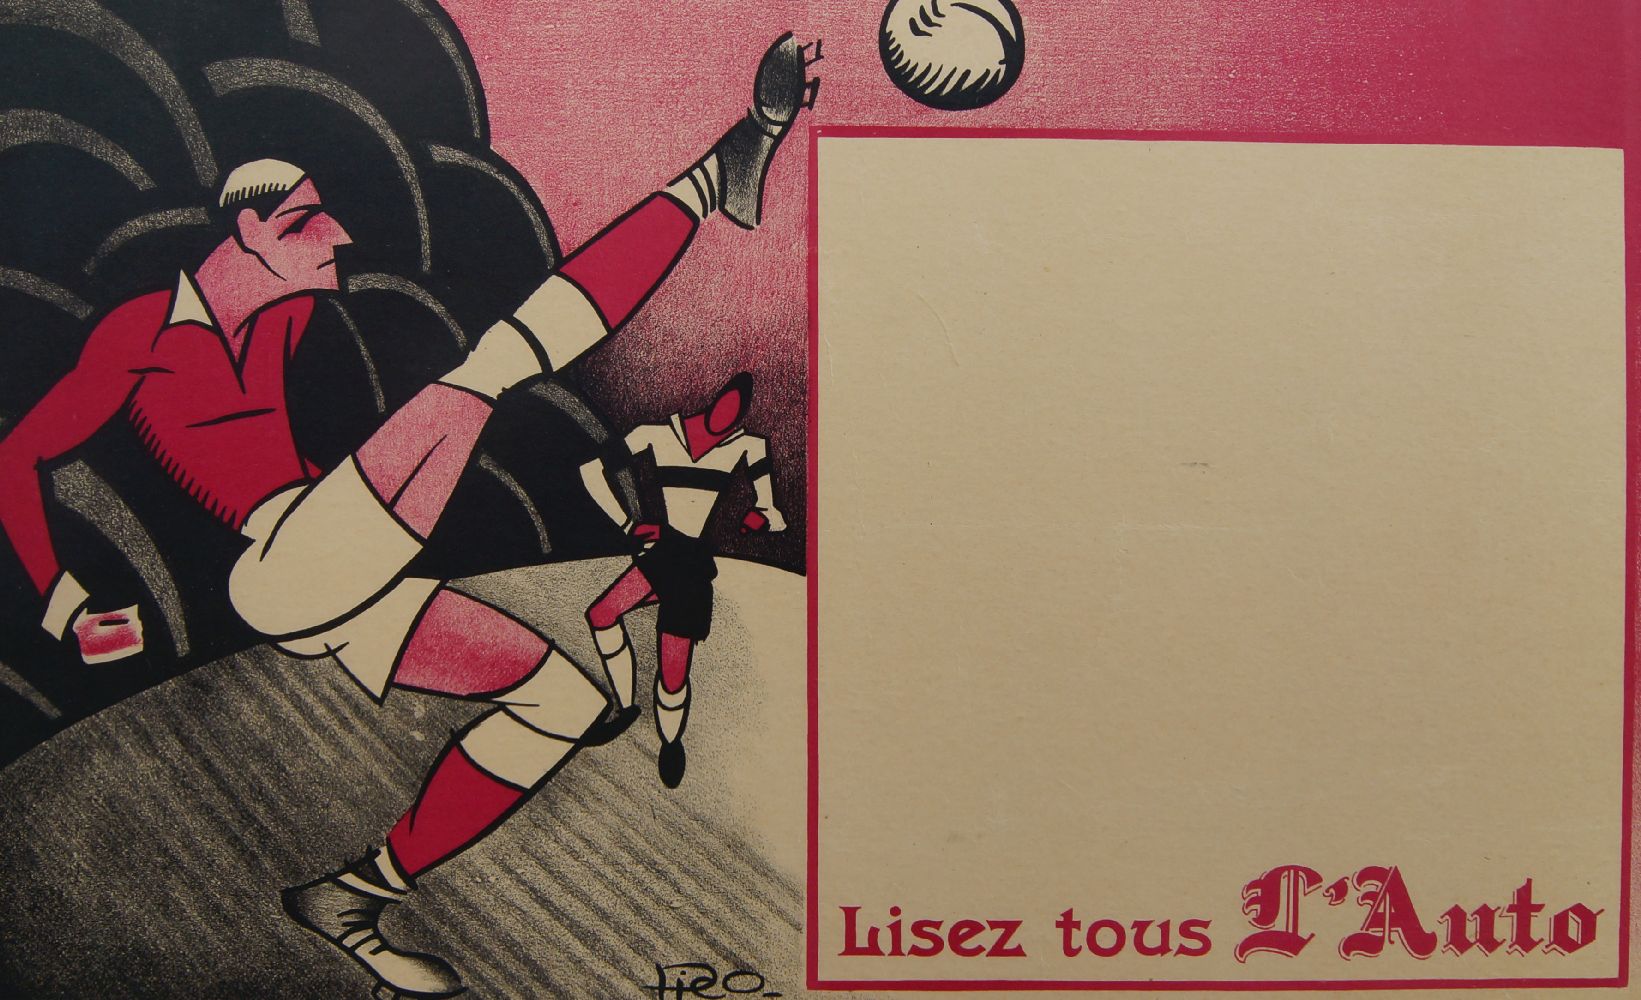 Maurice 'Pico' Picaud (French, 1900-1977), a colour lithograph advertising poster, titled 'Lisez